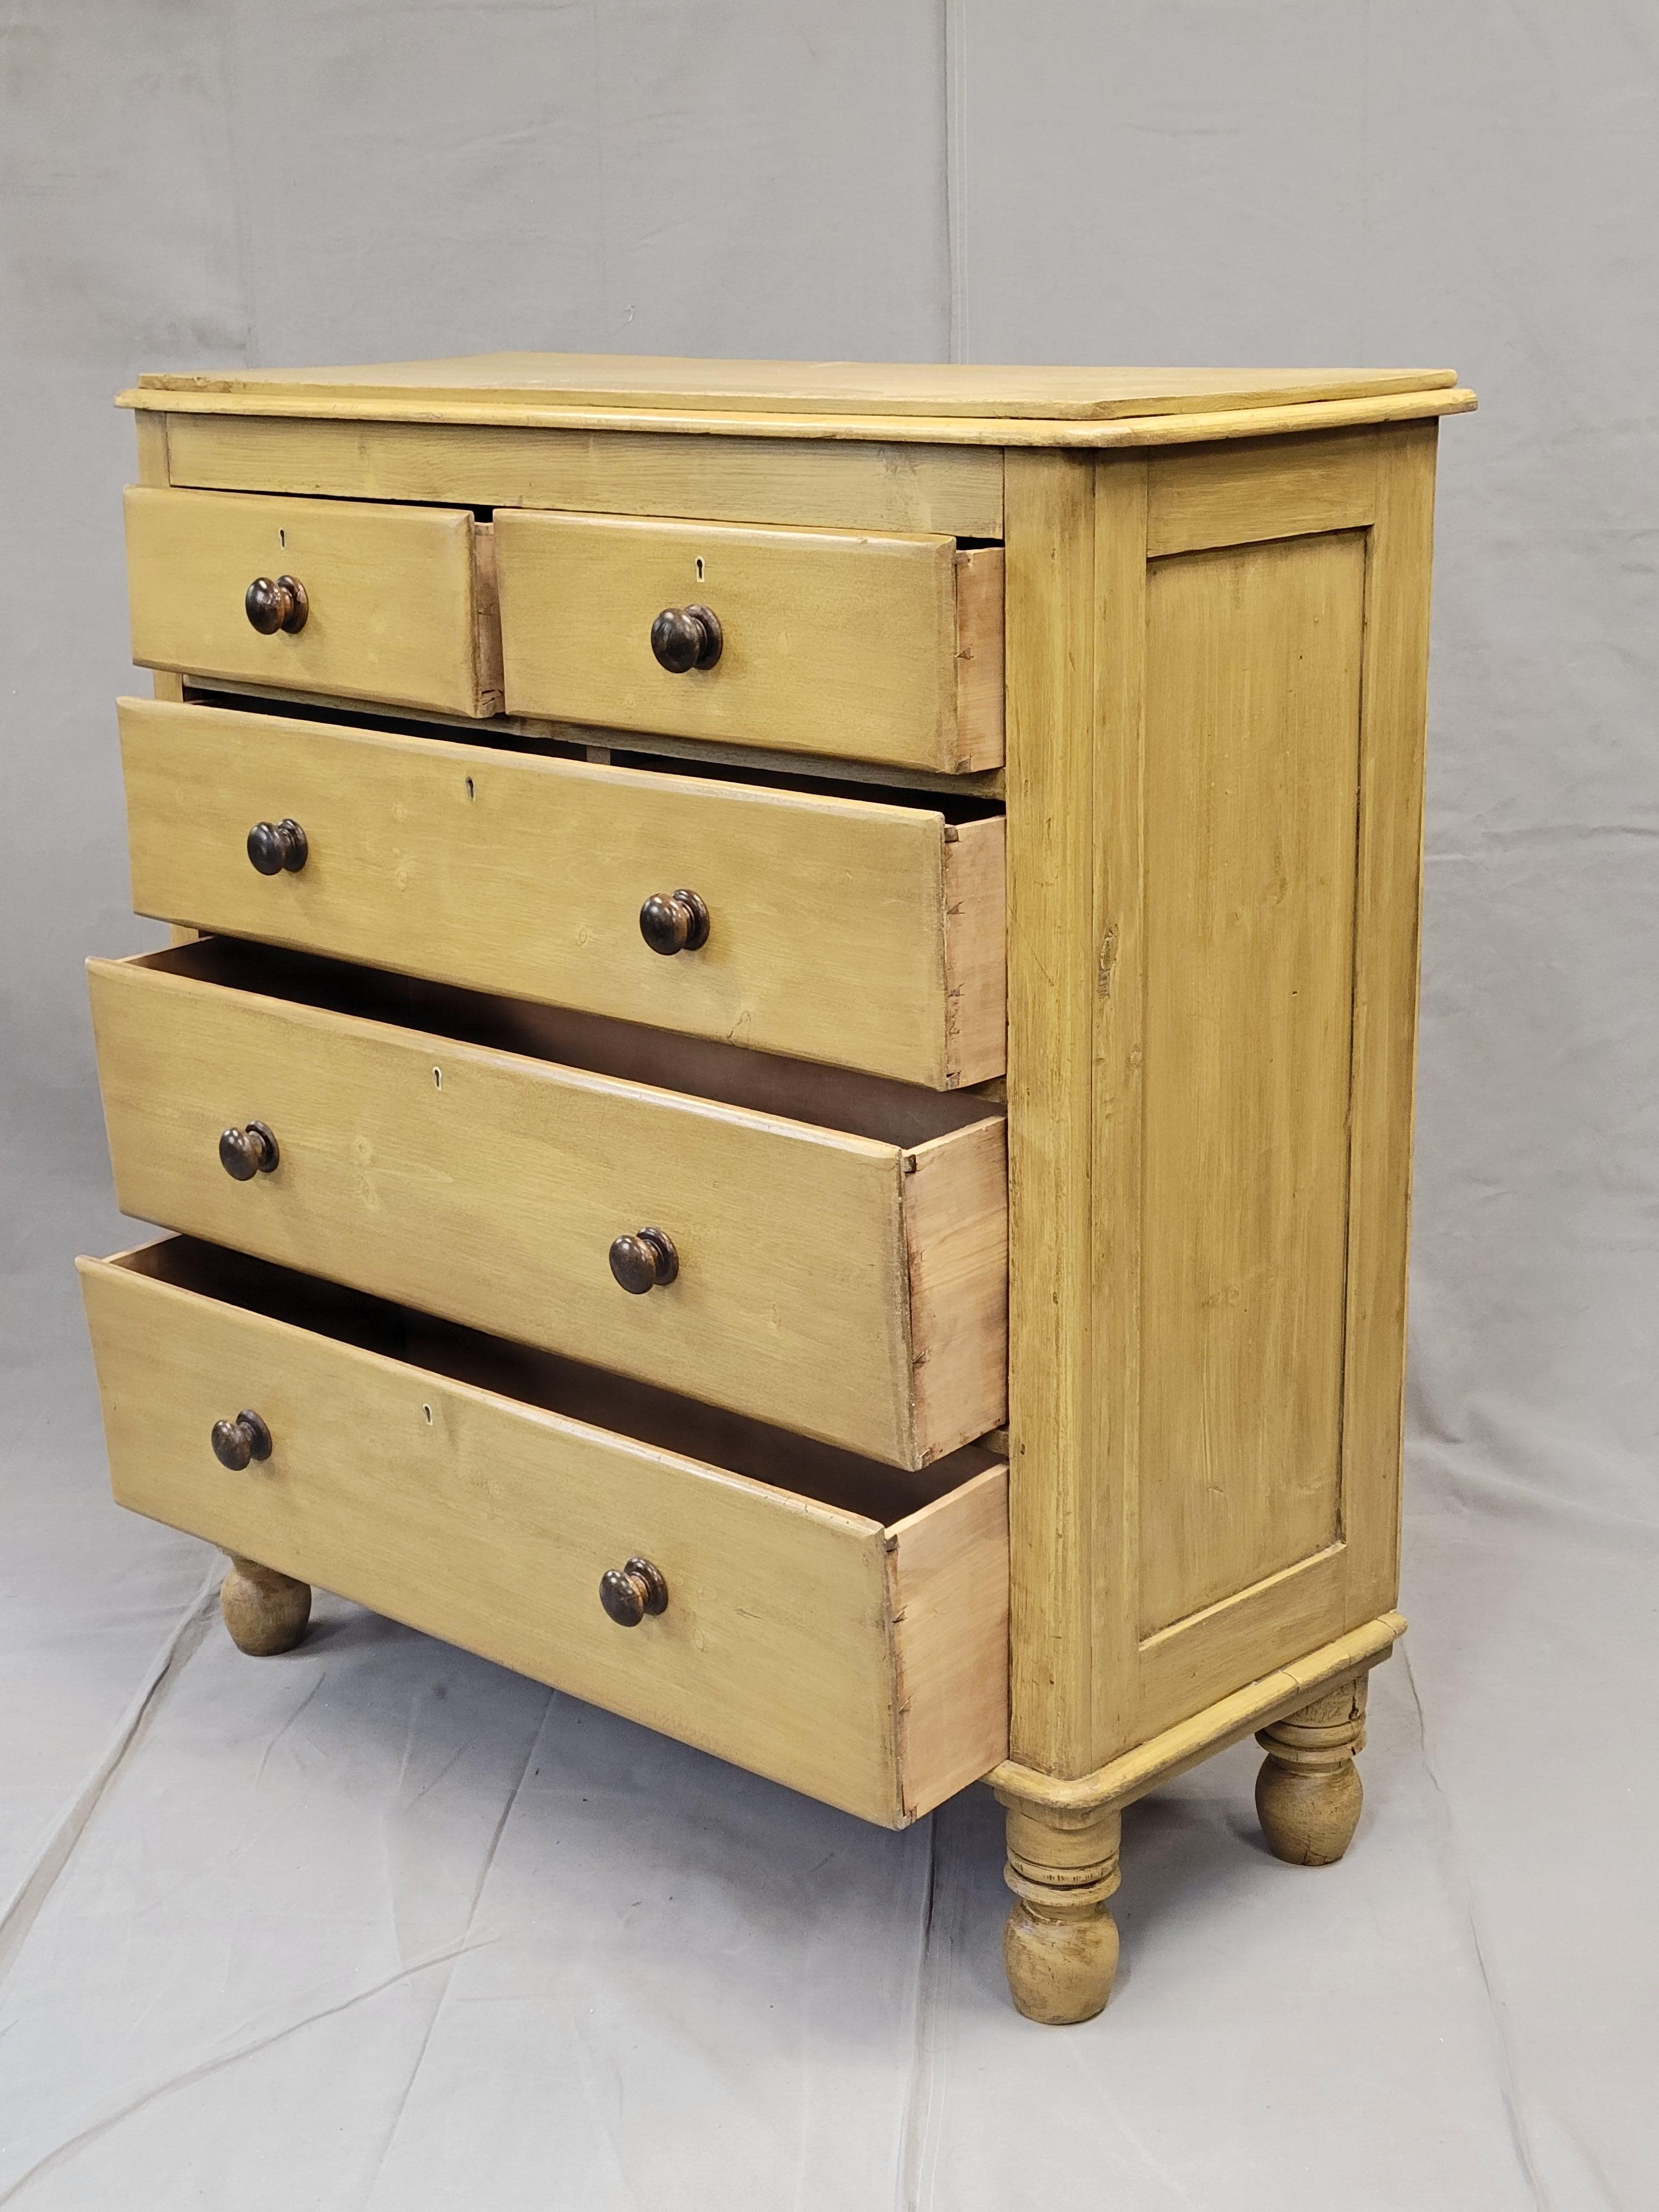 British Antique English Edwardian Circa 1900 Painted Pine Dresser Chest of Drawers For Sale